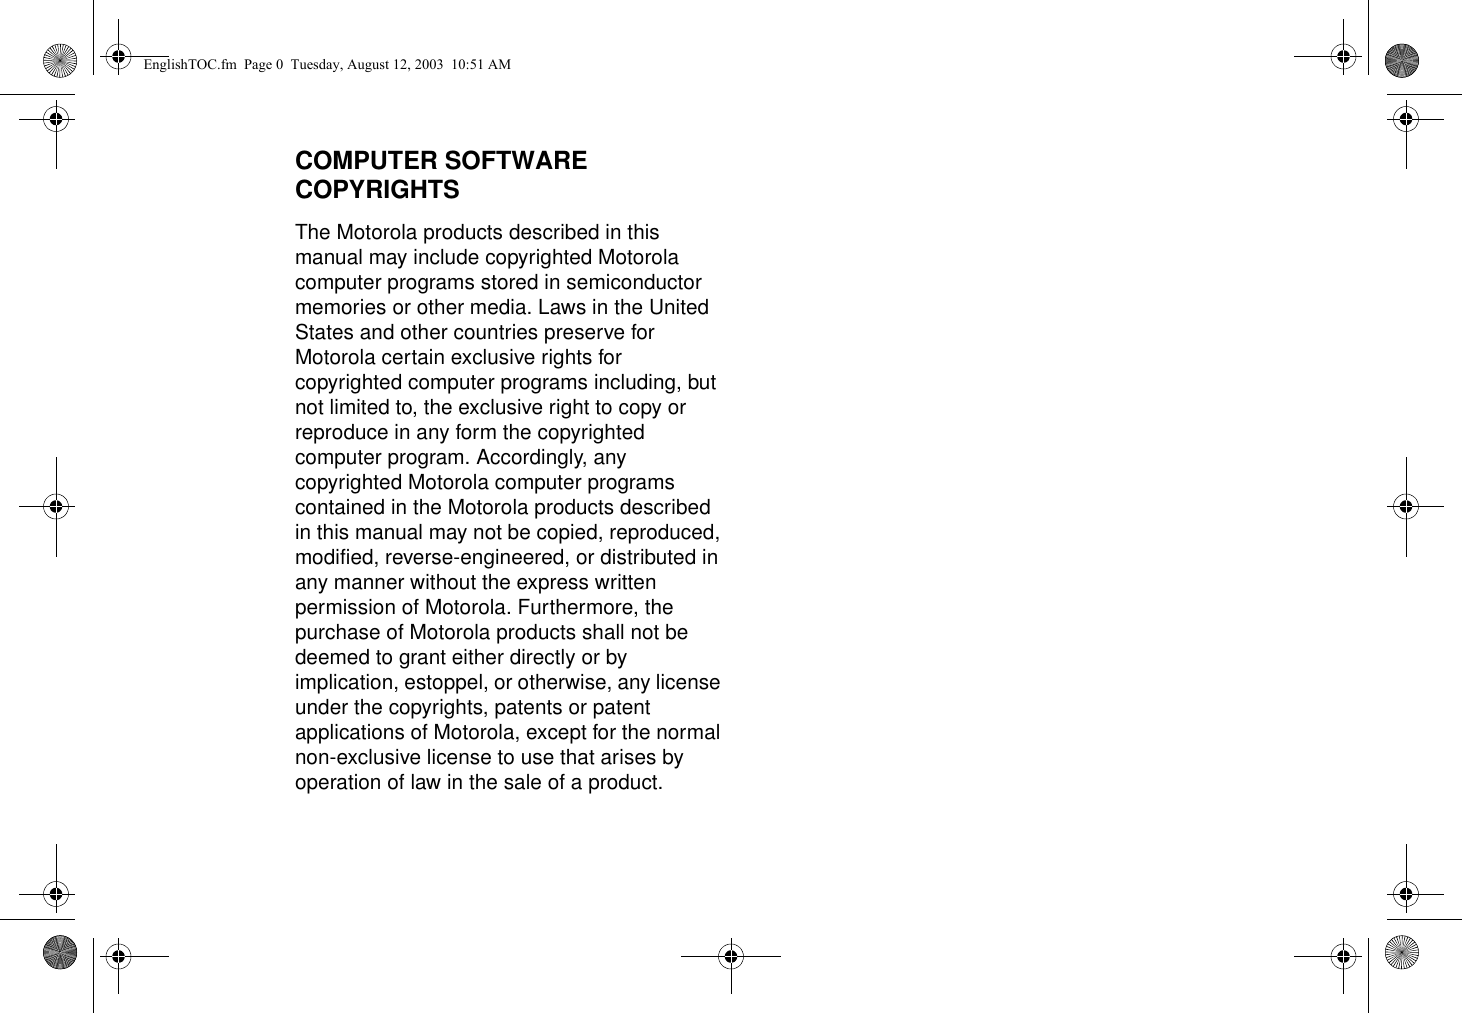 COMPUTER SOFTWARE COPYRIGHTSThe Motorola products described in this manual may include copyrighted Motorola computer programs stored in semiconductor memories or other media. Laws in the United States and other countries preserve for Motorola certain exclusive rights for copyrighted computer programs including, but not limited to, the exclusive right to copy or reproduce in any form the copyrighted computer program. Accordingly, any copyrighted Motorola computer programs contained in the Motorola products described in this manual may not be copied, reproduced, modified, reverse-engineered, or distributed in any manner without the express written permission of Motorola. Furthermore, the purchase of Motorola products shall not be deemed to grant either directly or by implication, estoppel, or otherwise, any license under the copyrights, patents or patent applications of Motorola, except for the normal non-exclusive license to use that arises by operation of law in the sale of a product.EnglishTOC.fm  Page 0  Tuesday, August 12, 2003  10:51 AM